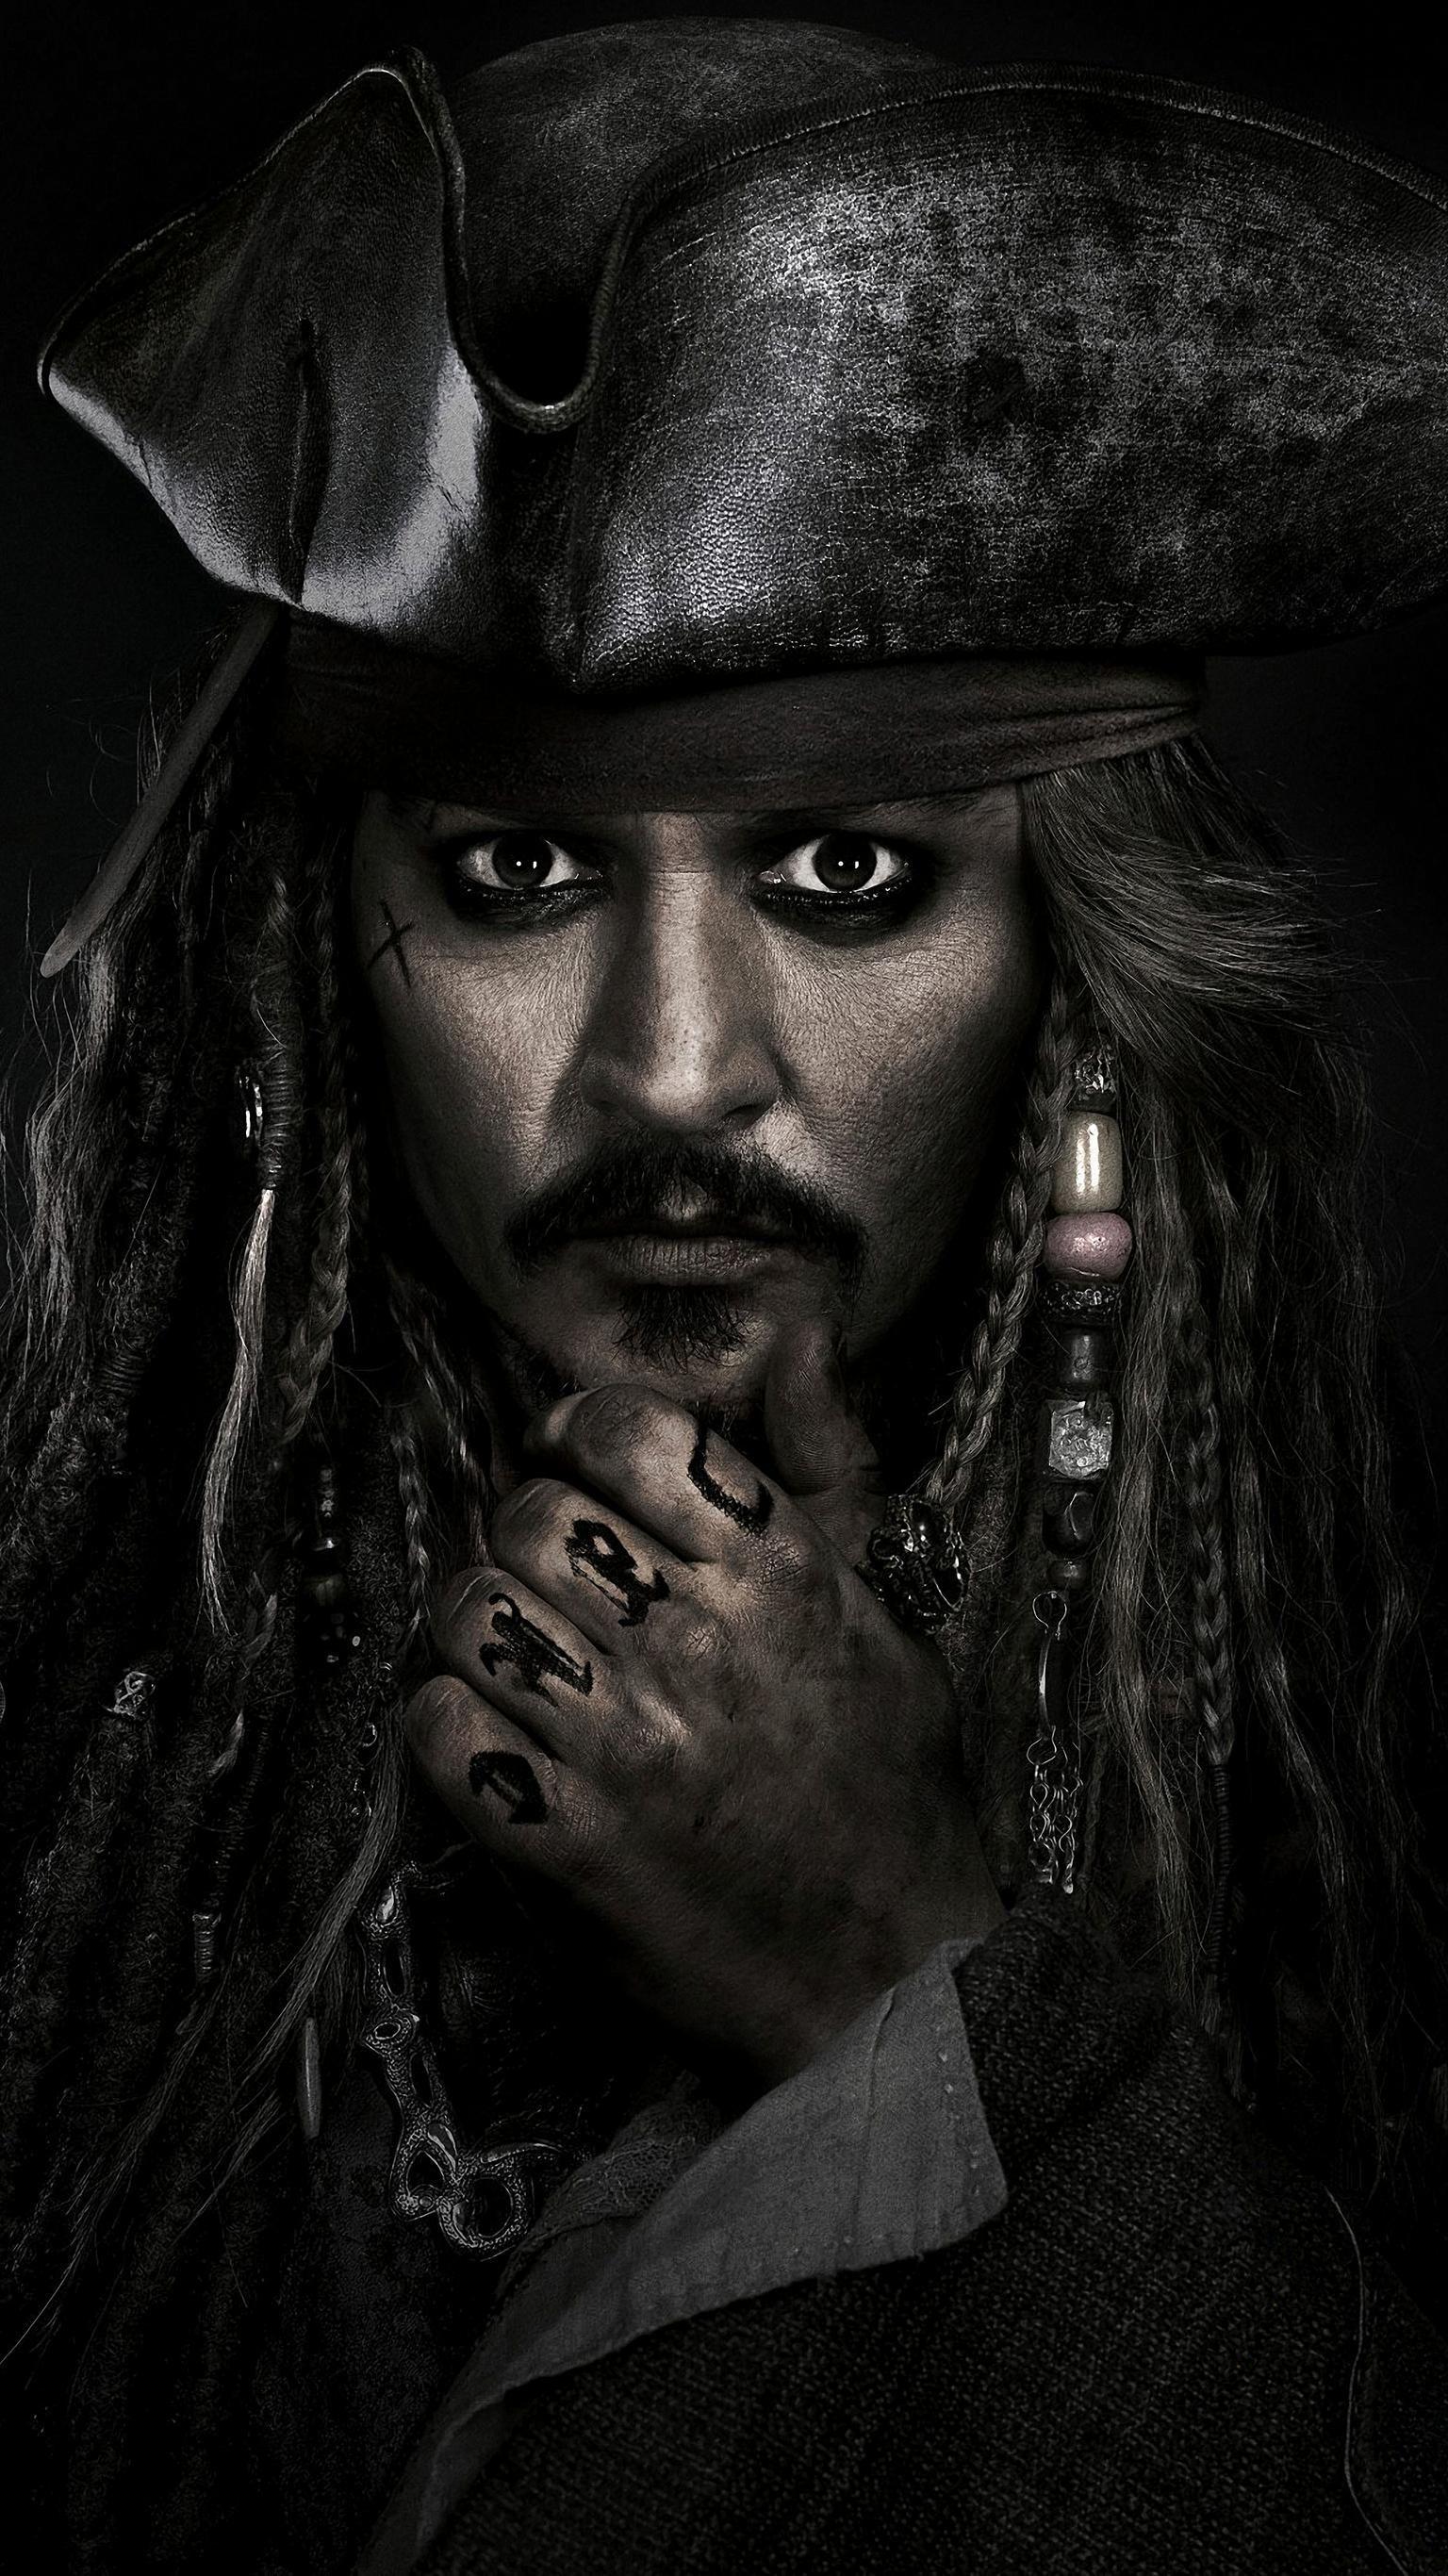 Pirates of the Caribbean Wallpapers - Top Free Pirates of the Caribbean ...